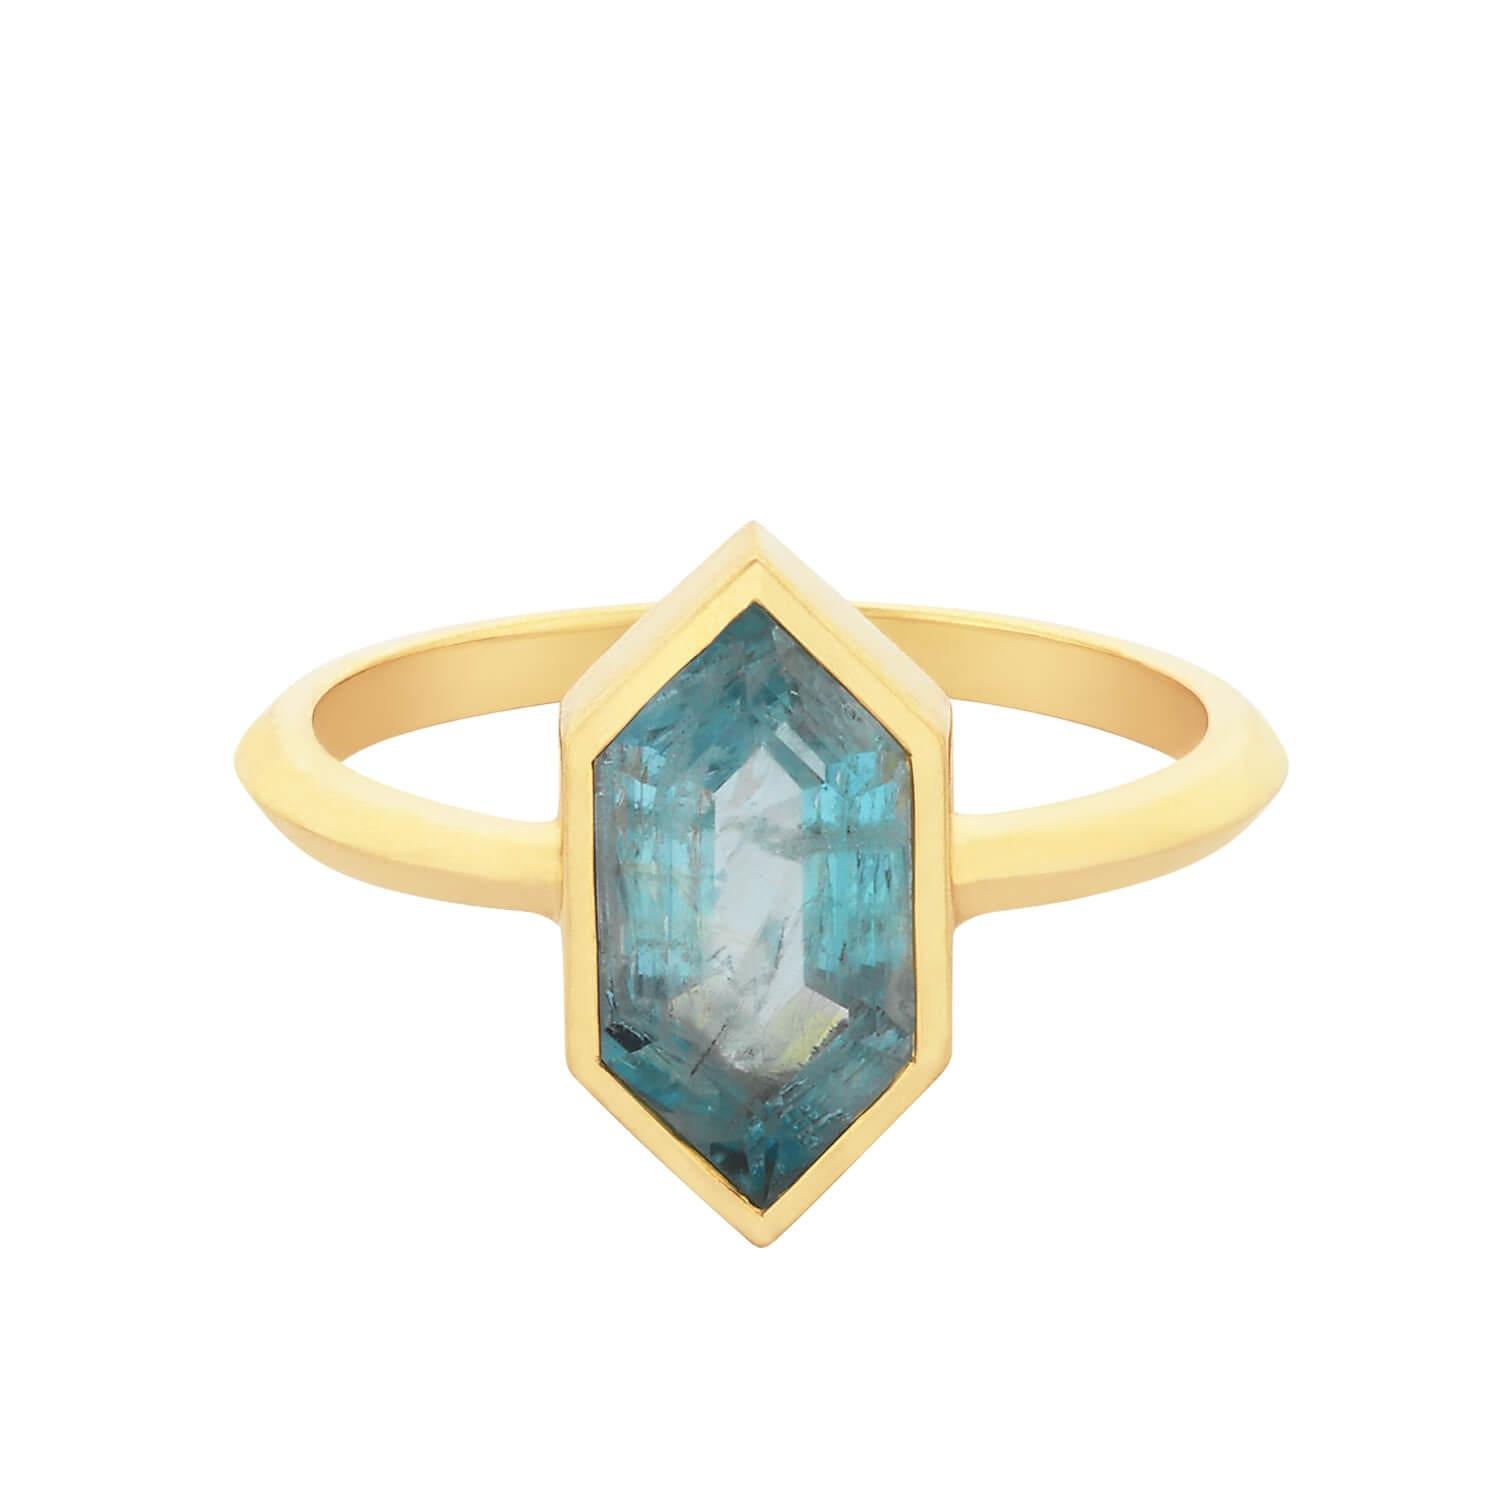 Ring size: 54

The Misti ring features an Aquamarine crystal cut set in an 18k gold frame. The pointed edge of the stone perfectly transitions into the sword edge band.

These bespoke hand cut stones make each ring truly unique, with their own